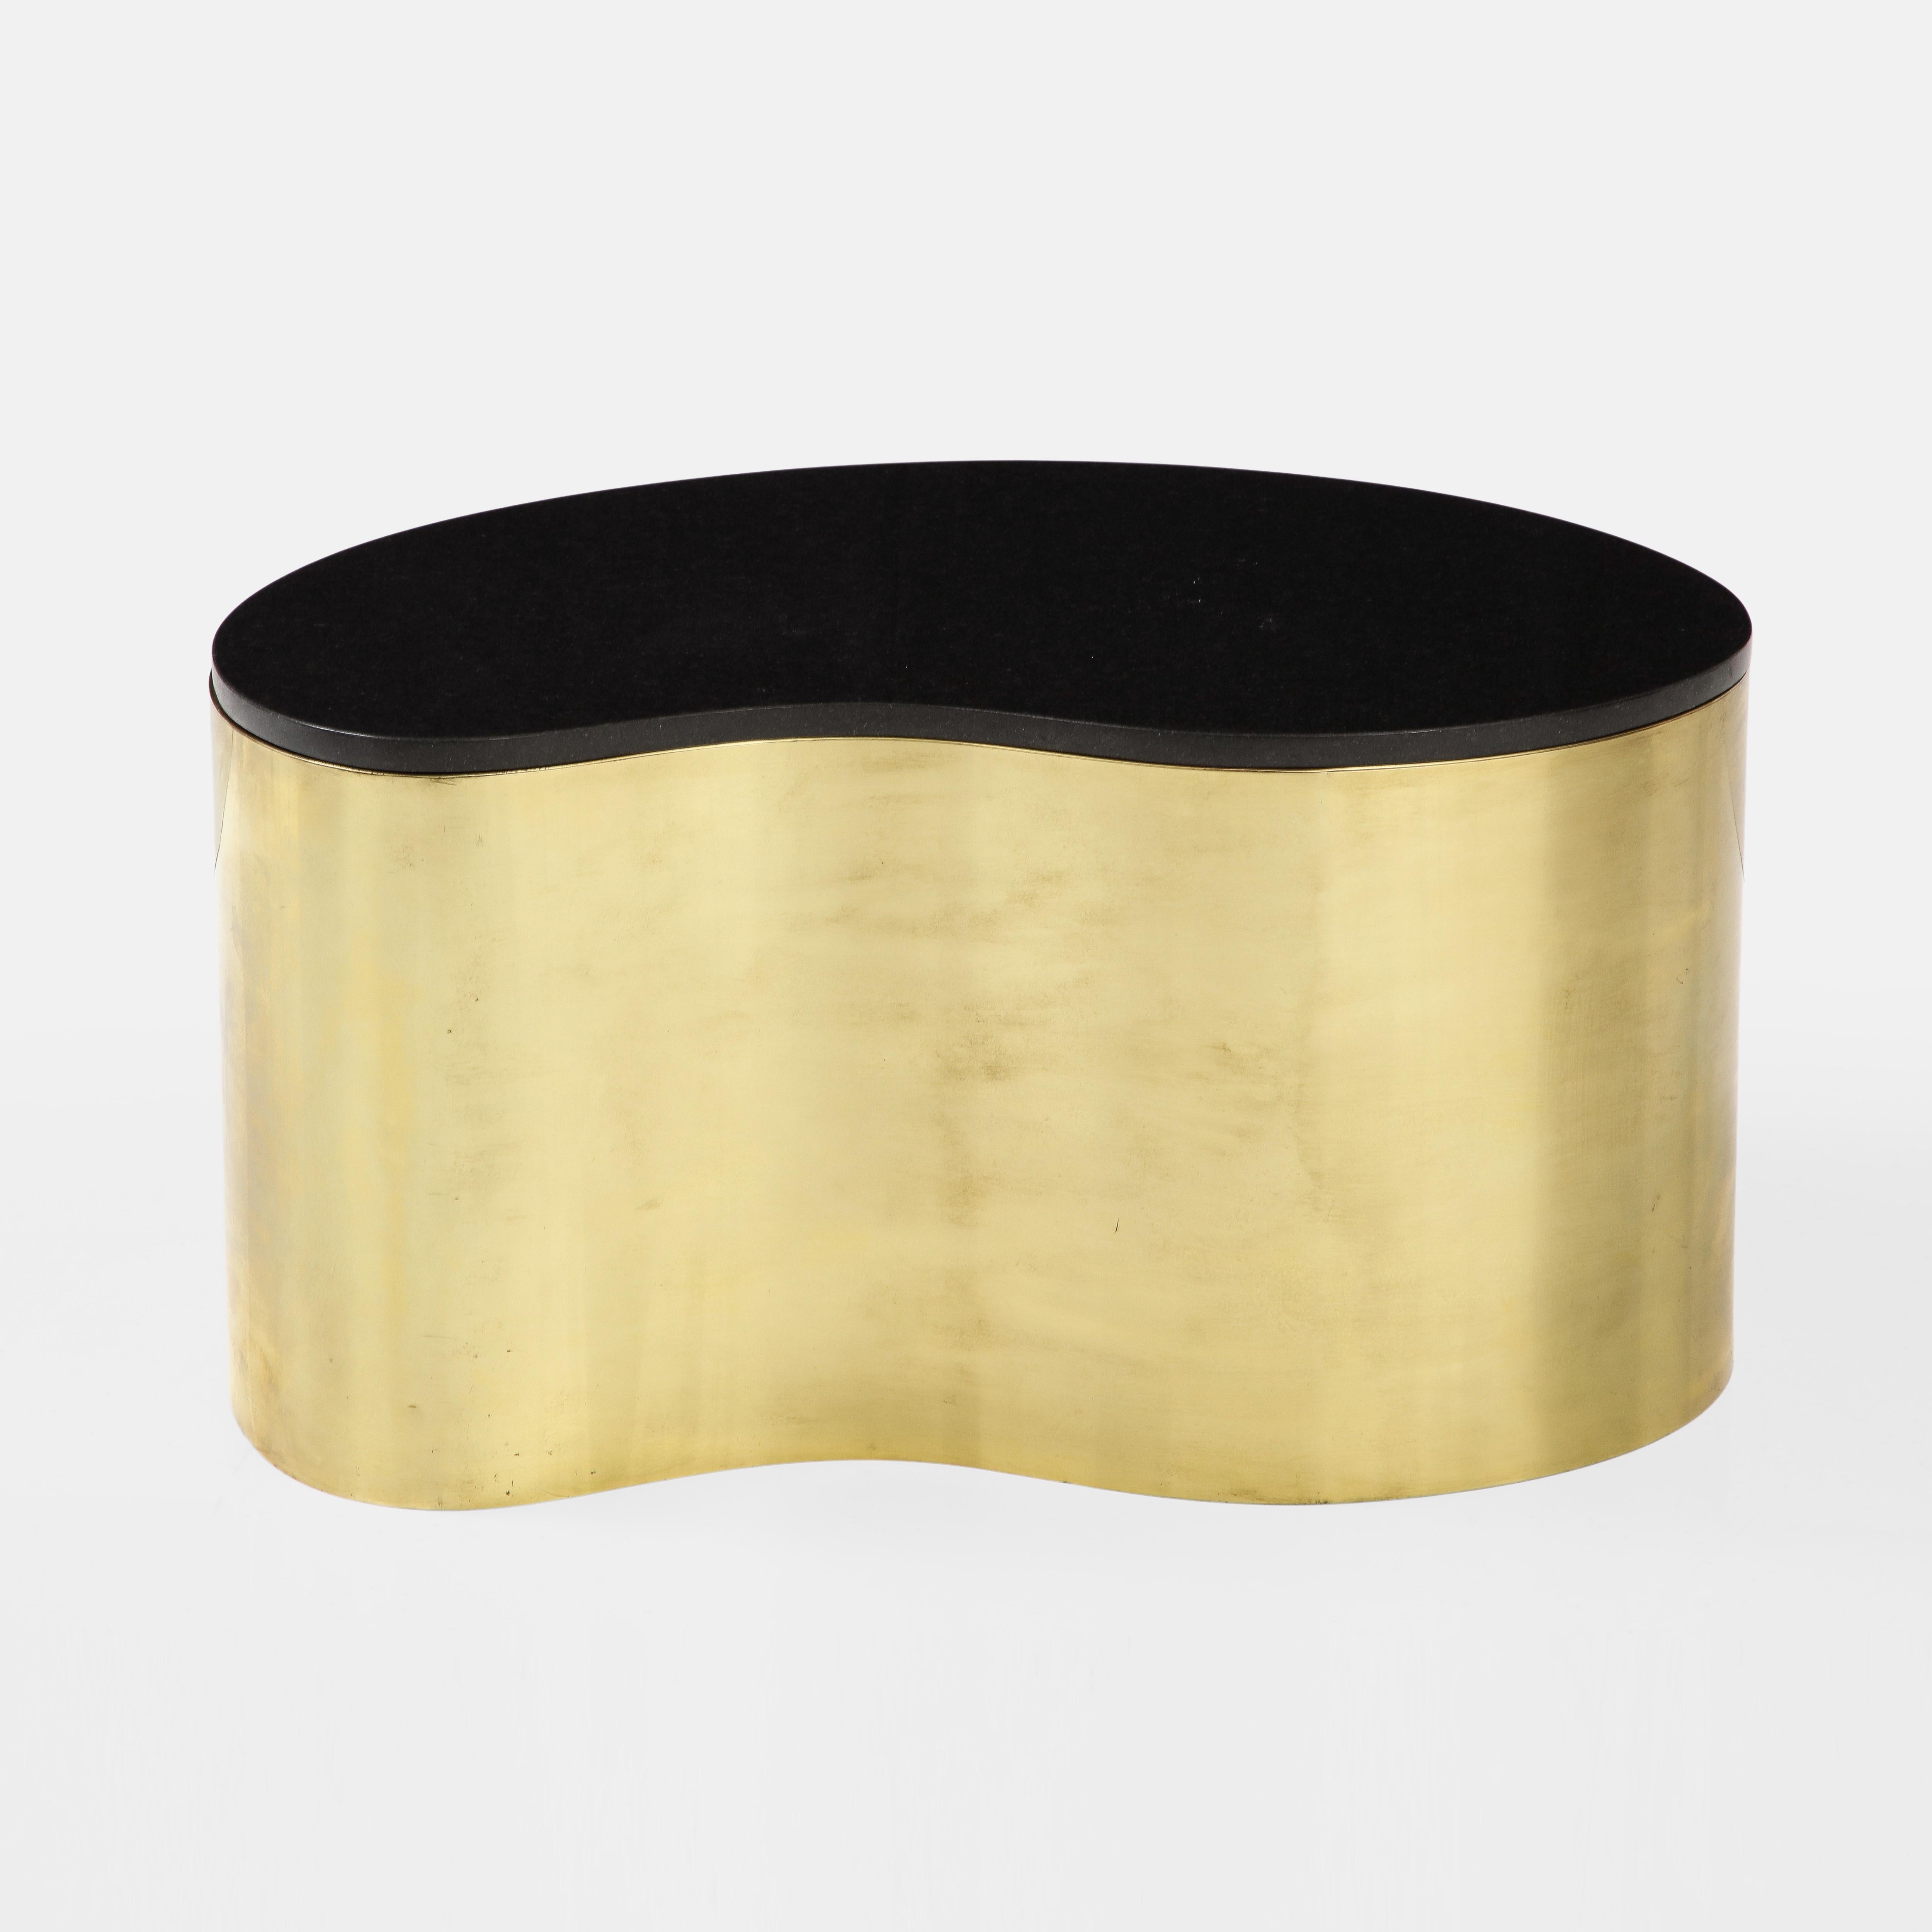 Karl Springer Freeform Coffee Table in Brass and Granite, 1970s For Sale 4